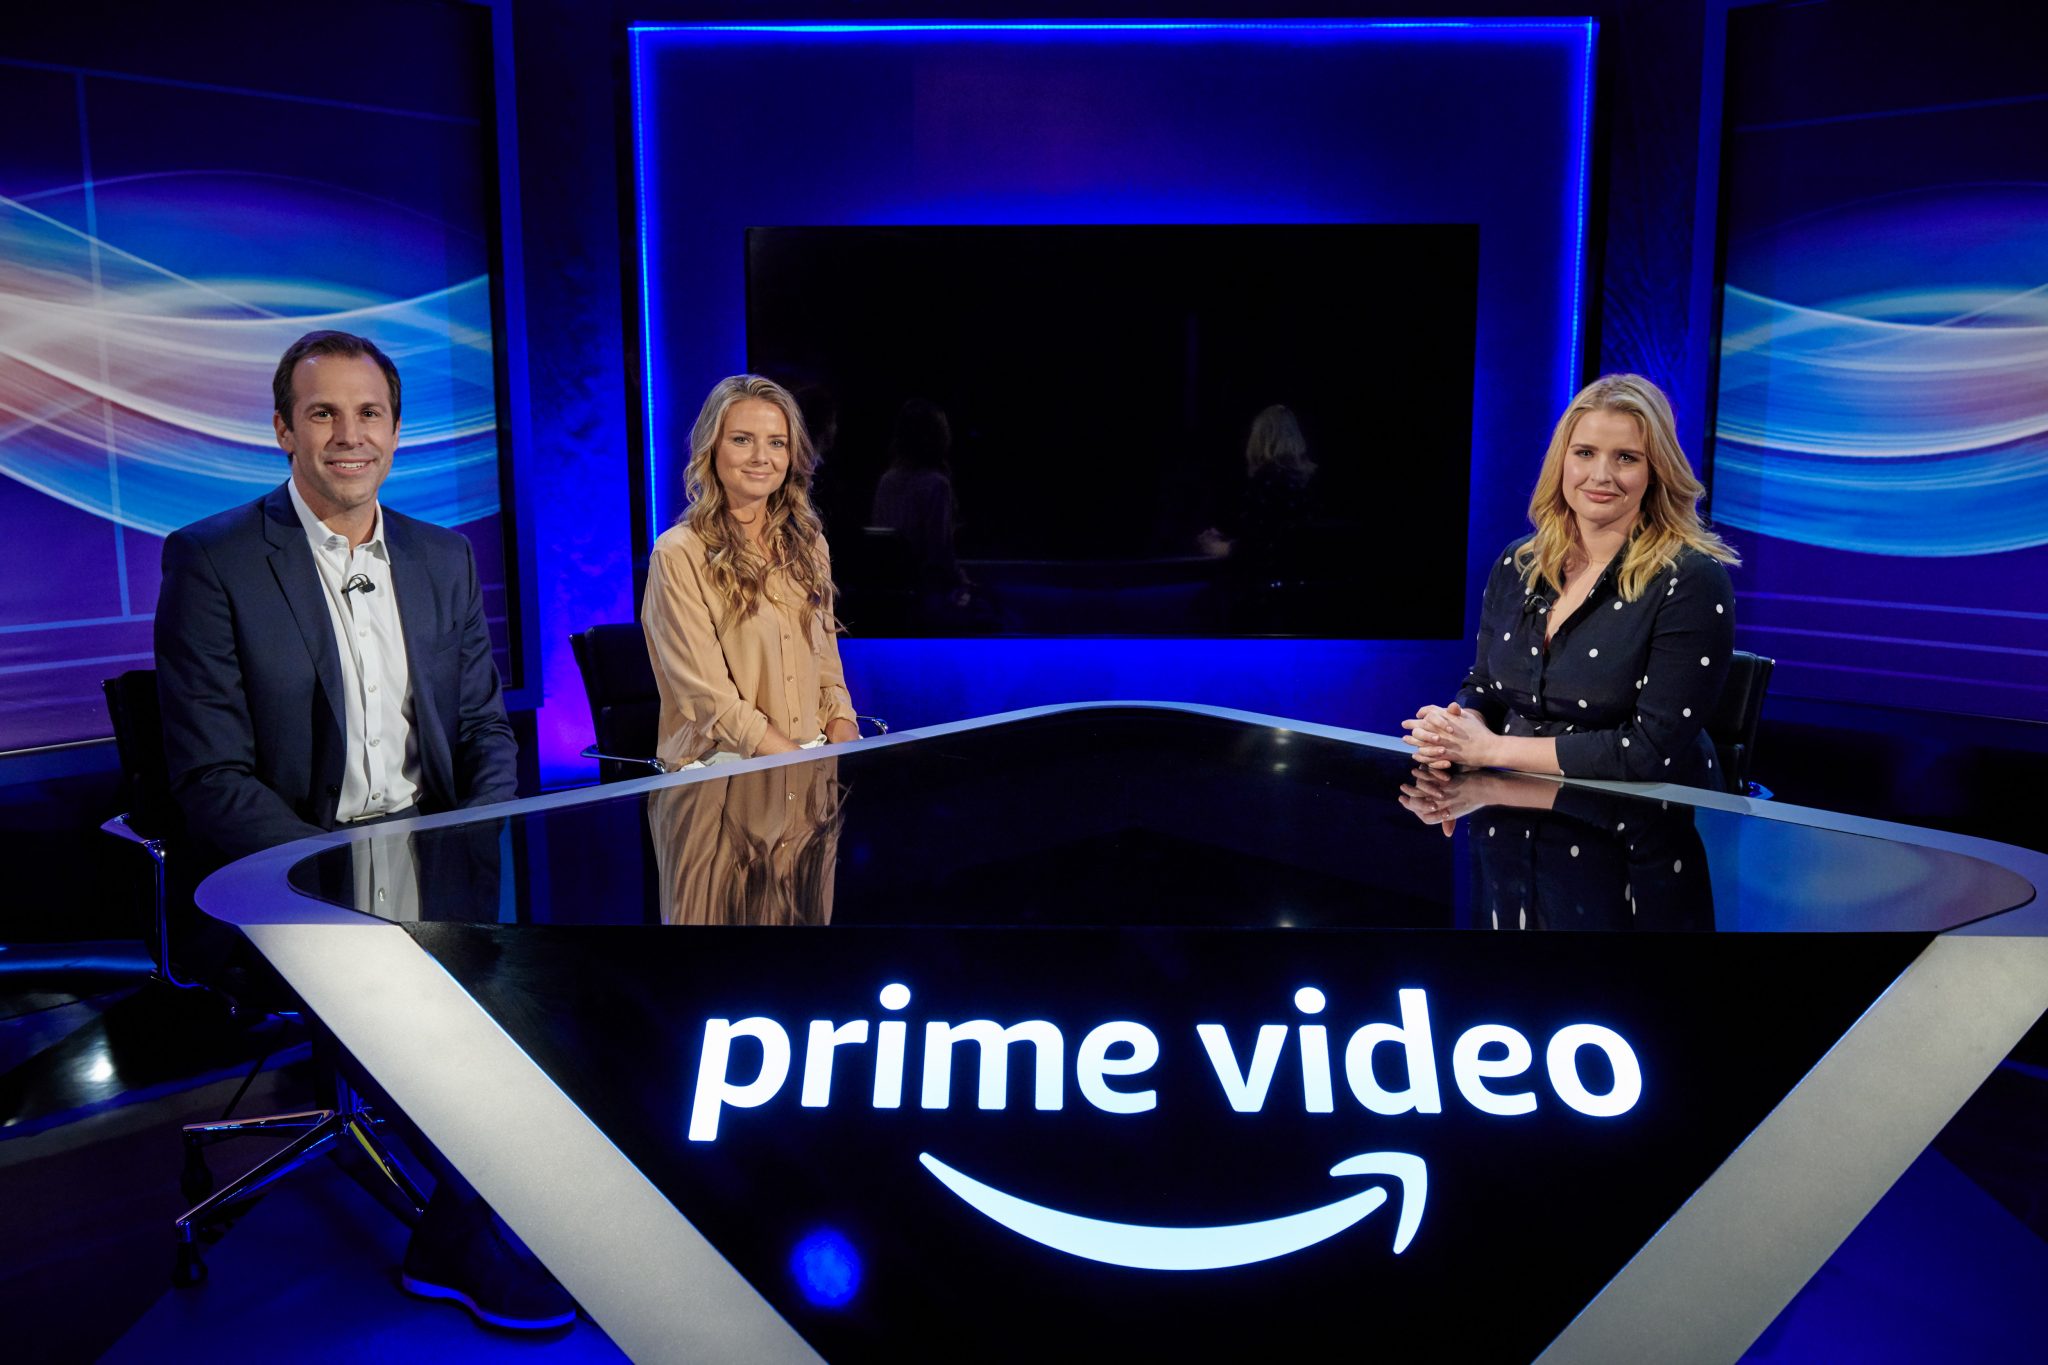 Amazon reveals extensive summer slate of live Tennis broadcasting